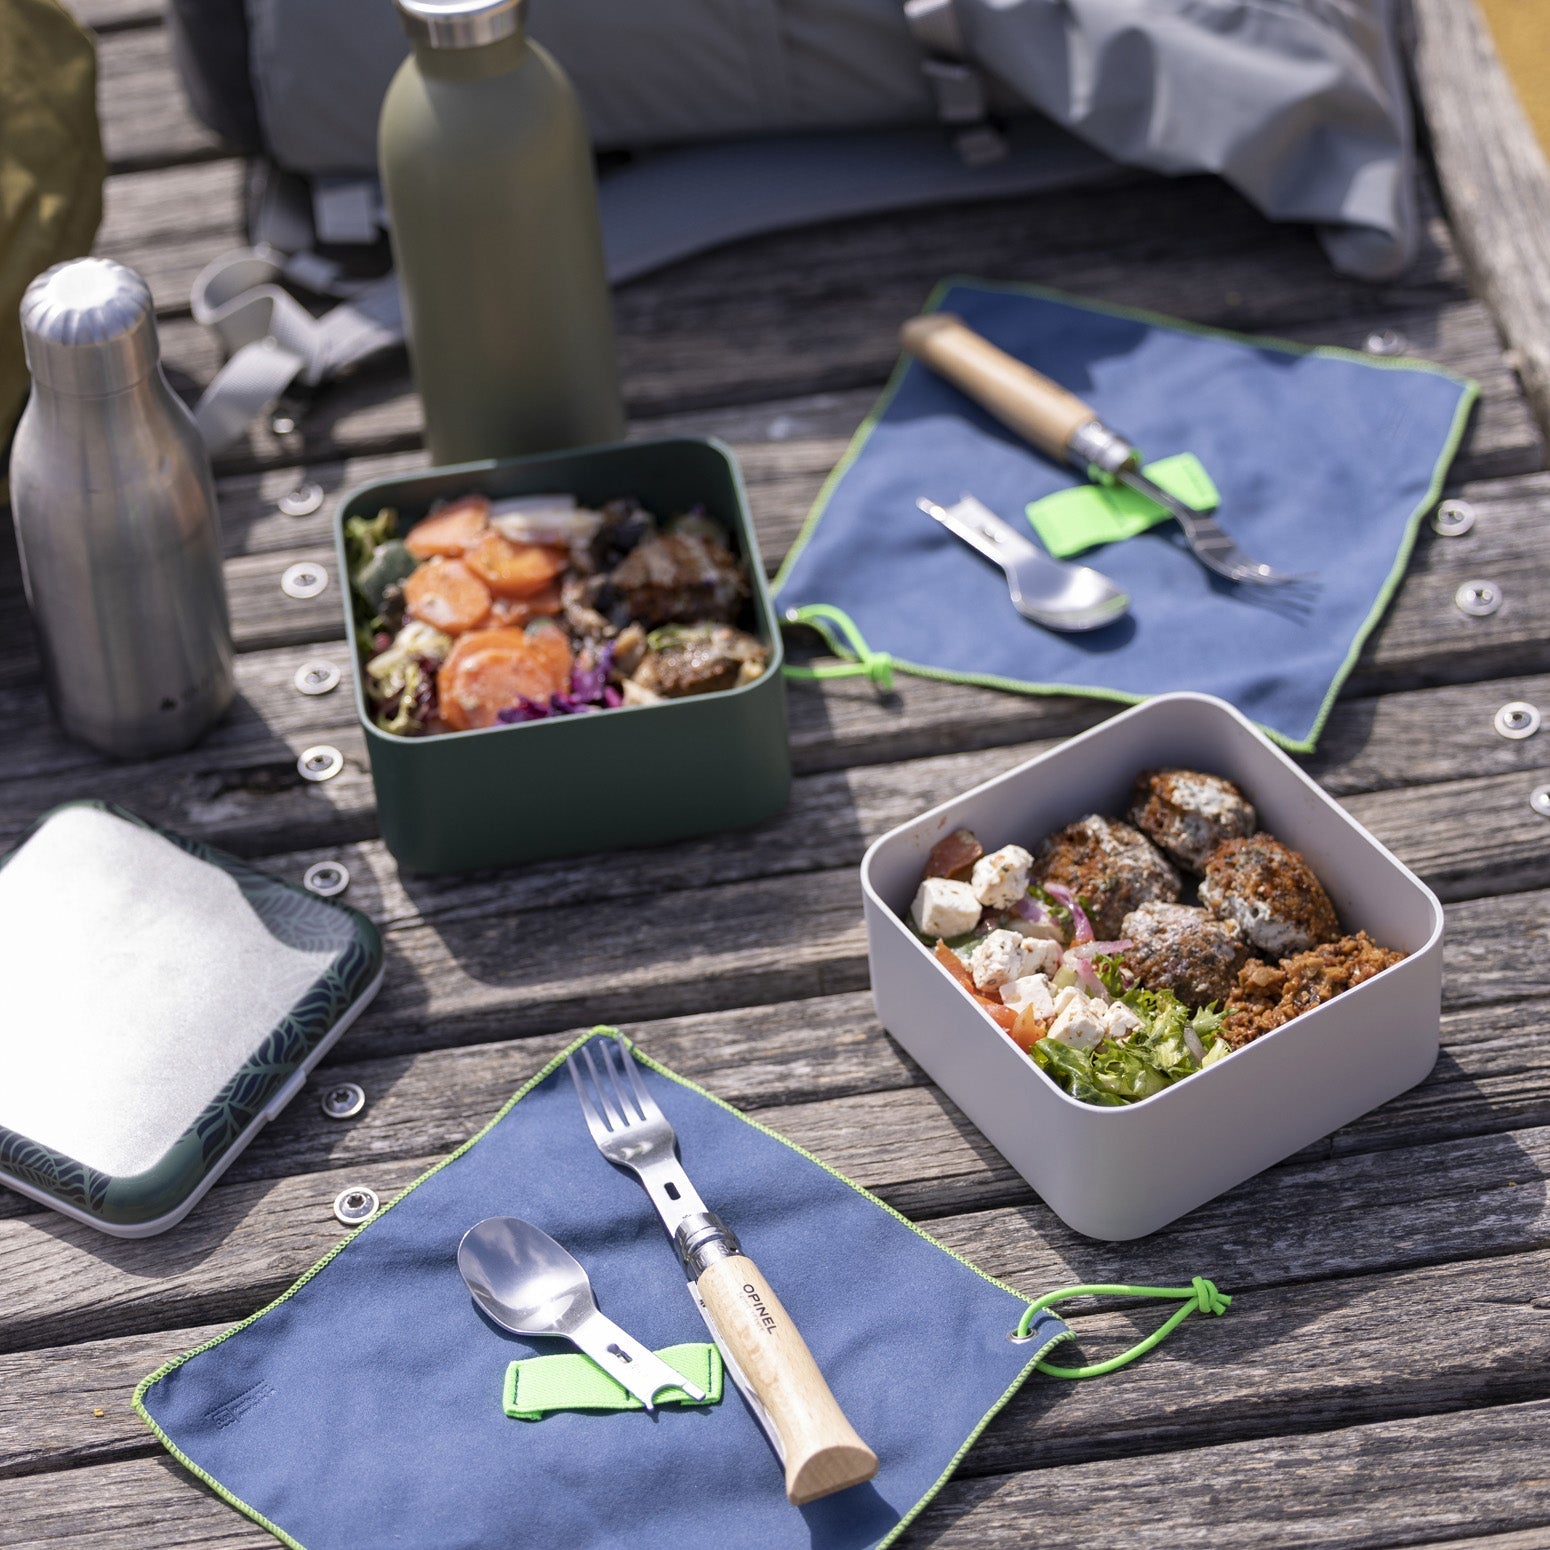 Opinel Picnic+ Set with No.08 Folding Knife